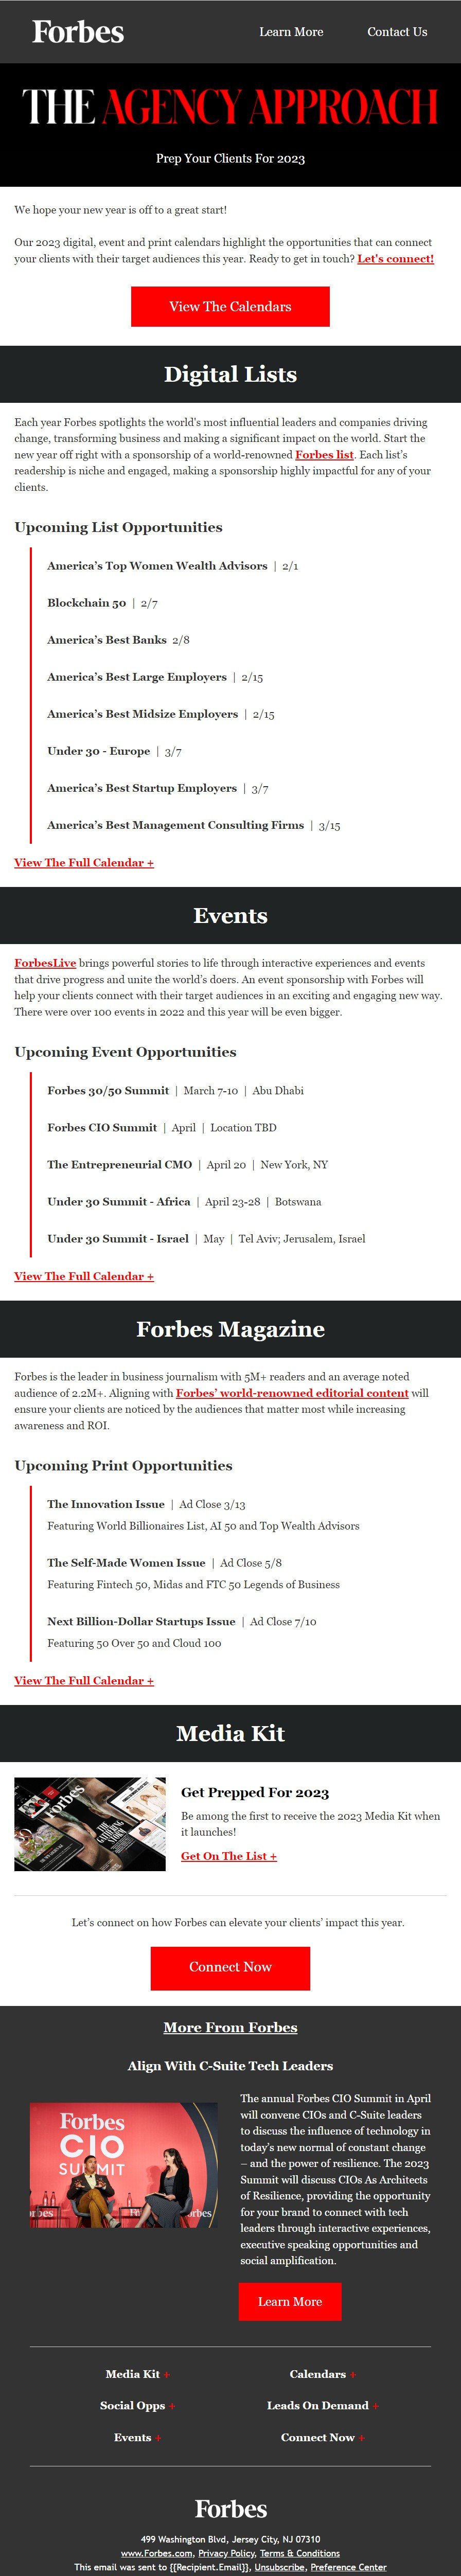 Example of Forbes promo email 